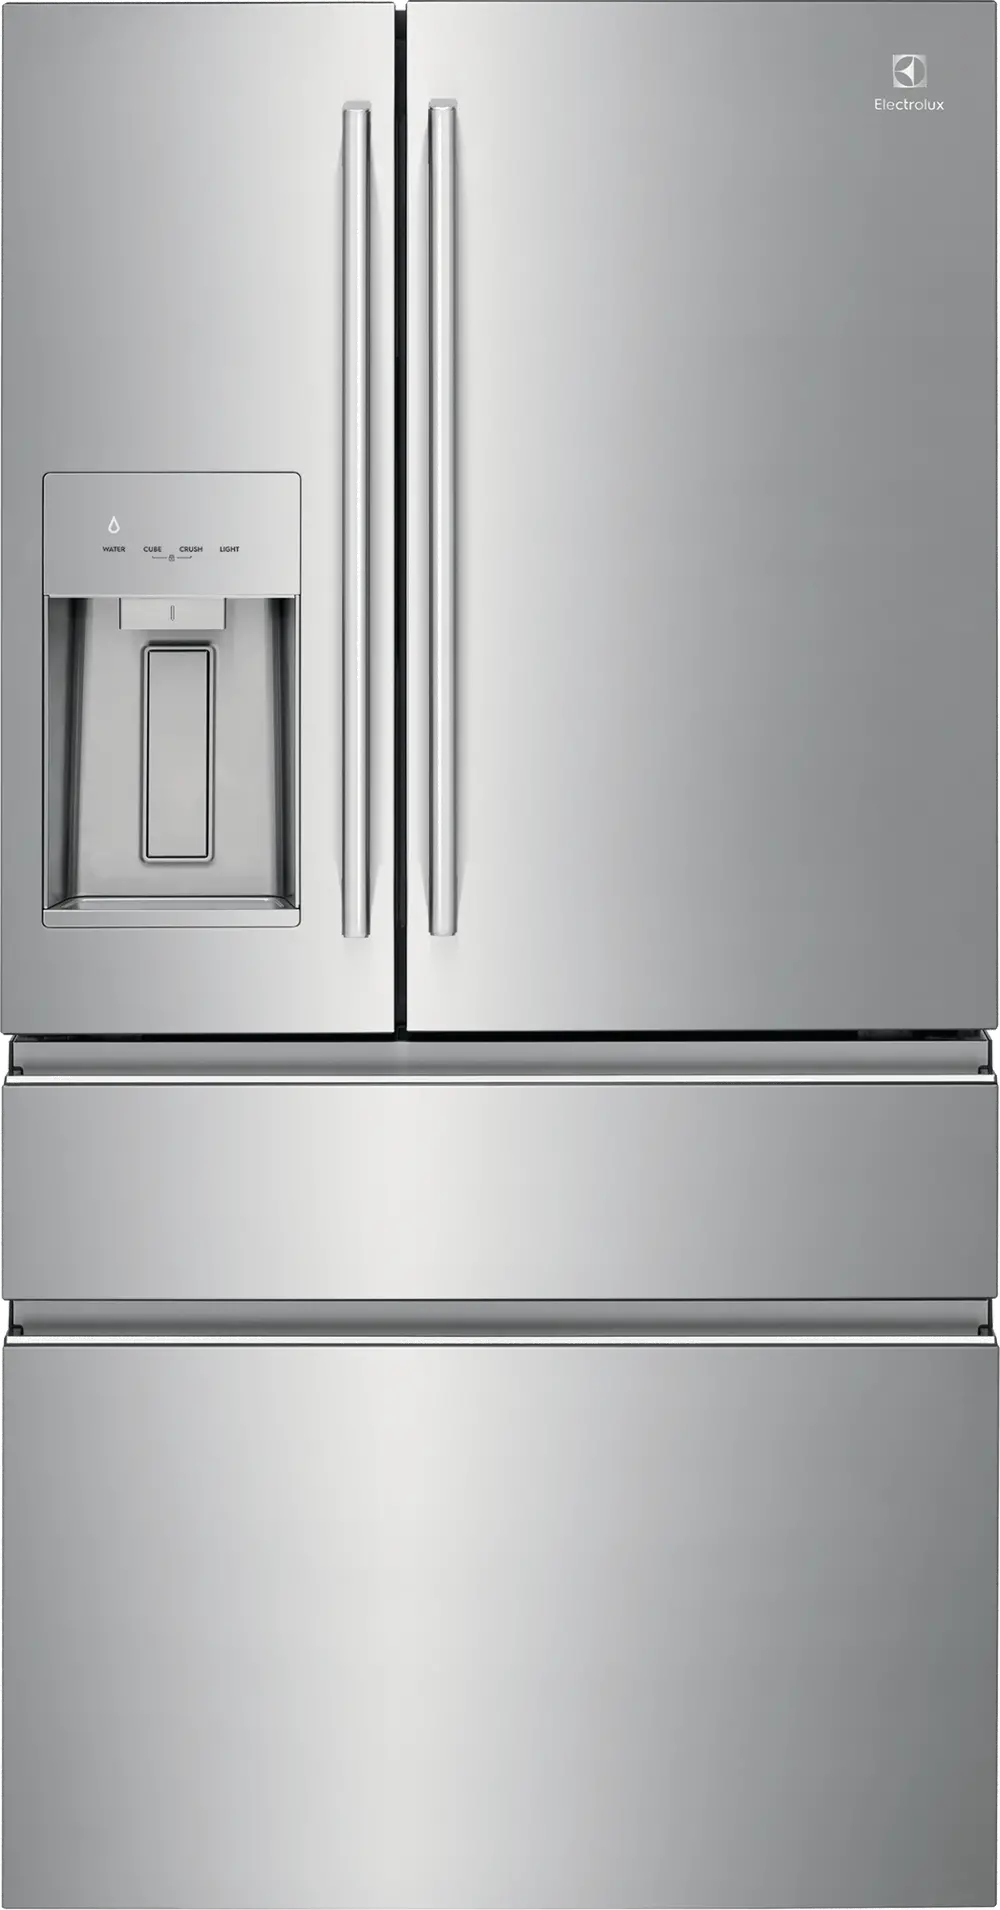 ERMC2295AS Electrolux 21.8 cu ft 4 Door Refrigerator - Counter Depth Stainless Steel-1